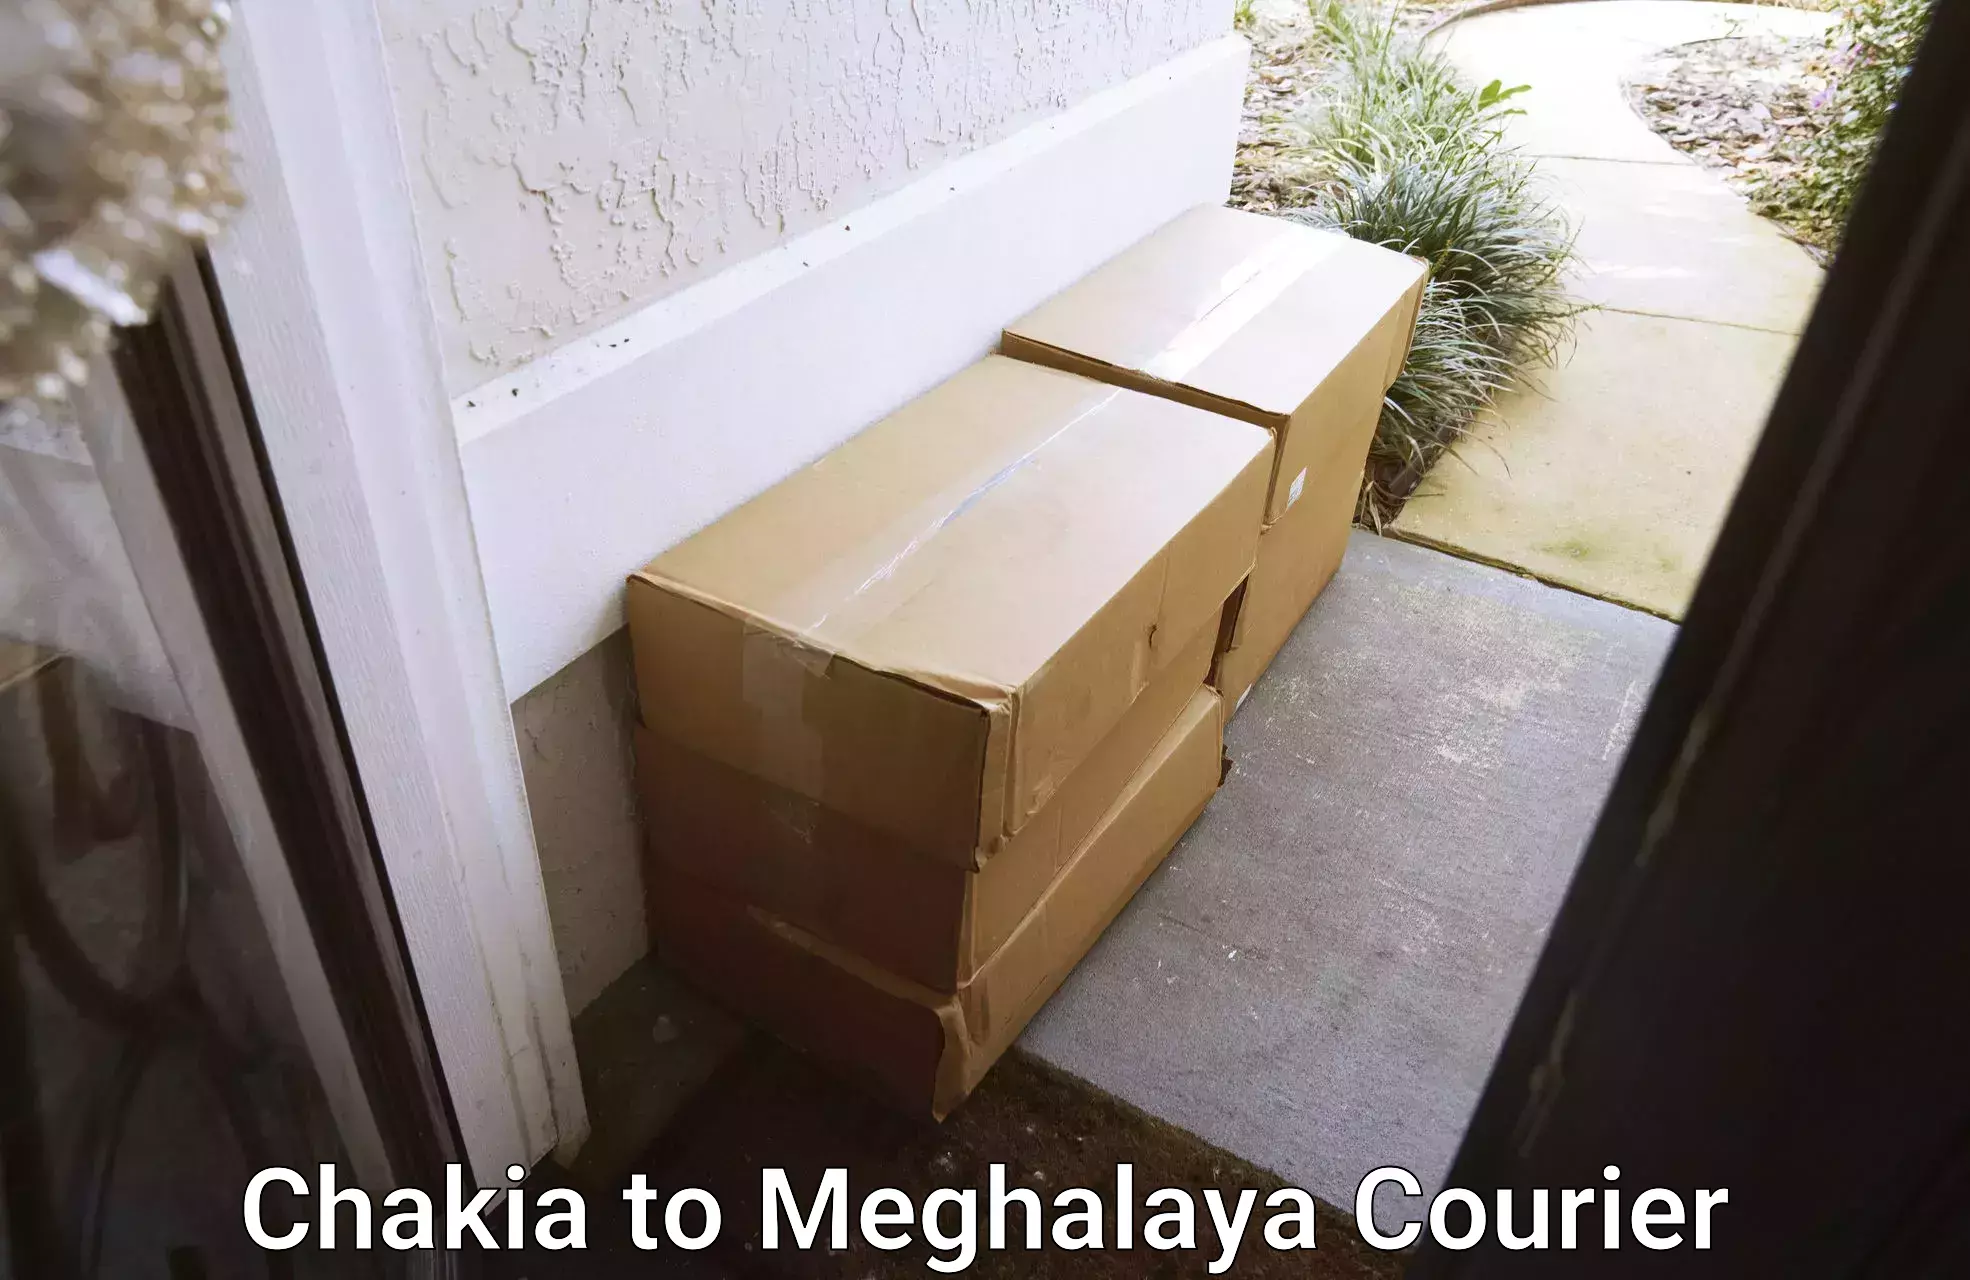 Home goods moving company Chakia to Umsaw